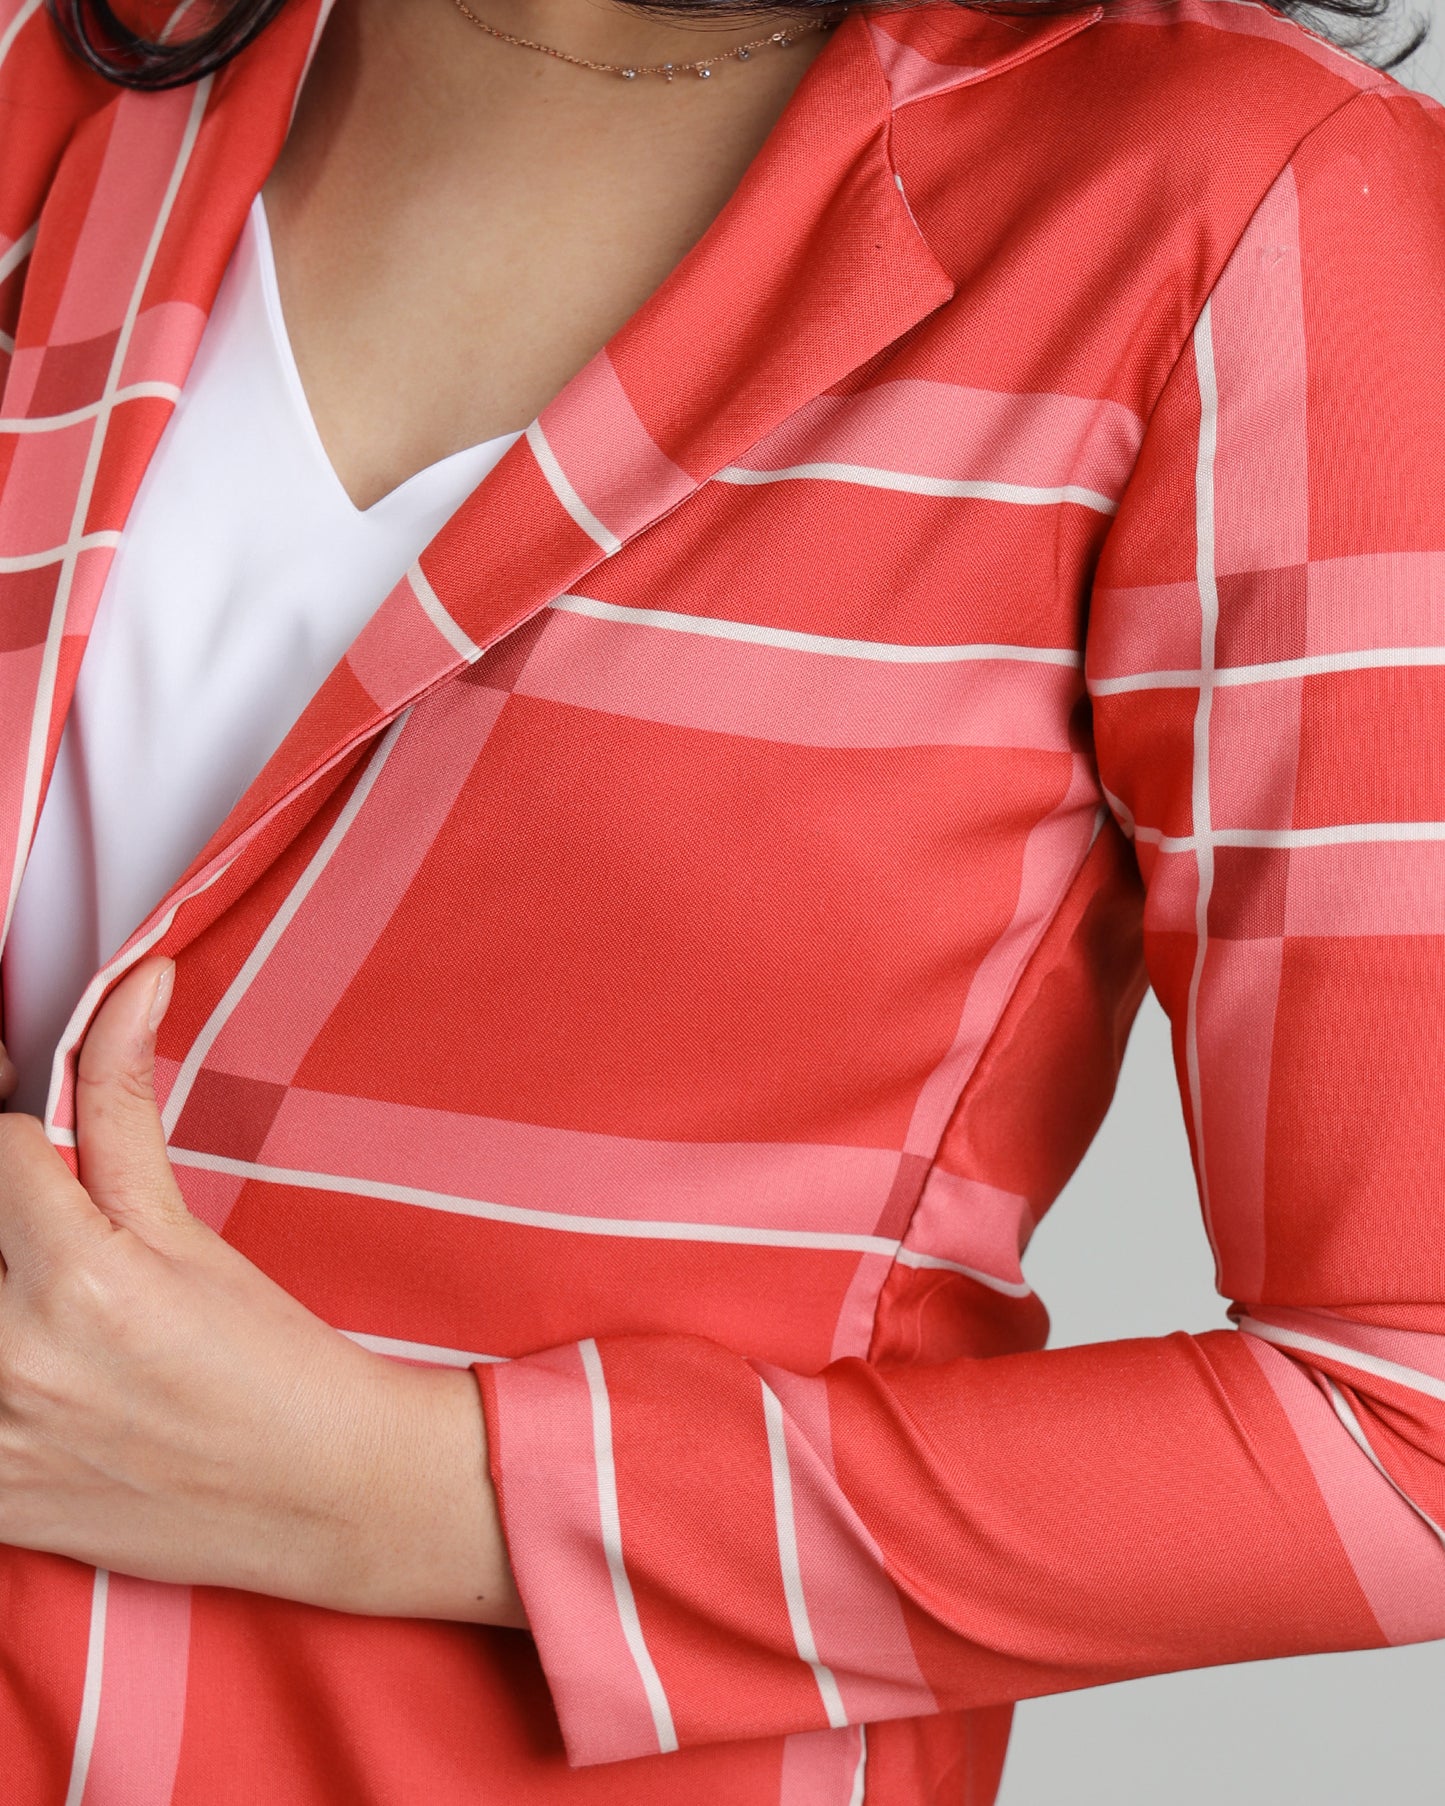 Red Hot Check: The Statement Womens Jacket